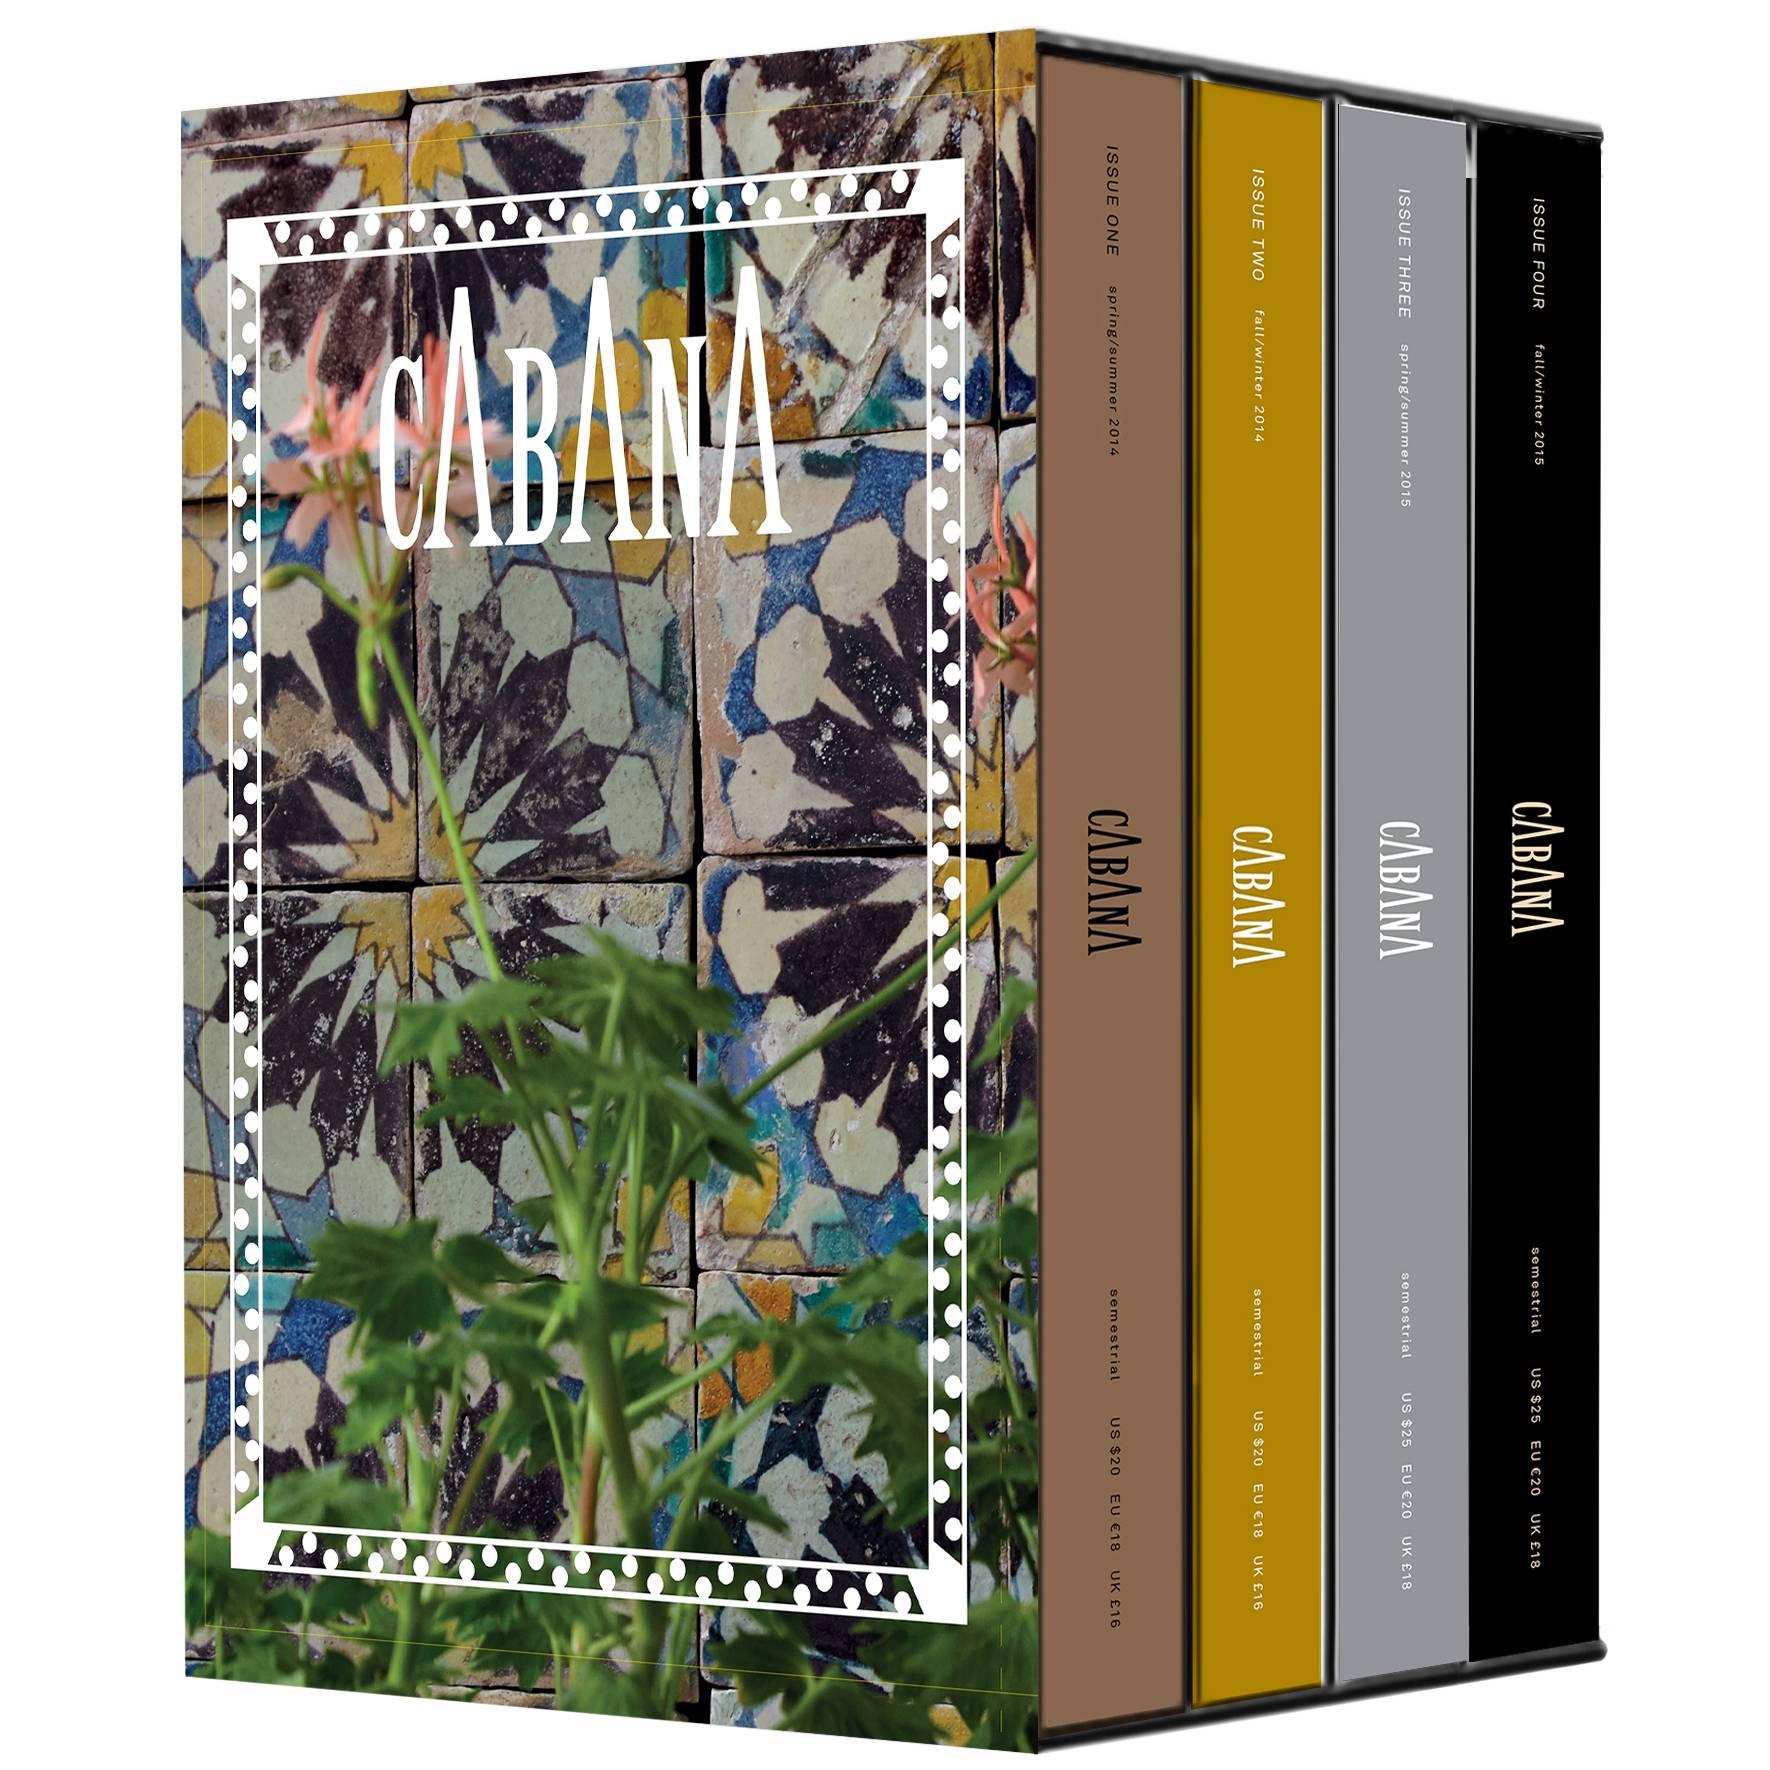 Collector's Limited Edition Box Set with Issues 1, 2, 3 and 4 of Cabana Magazine For Sale